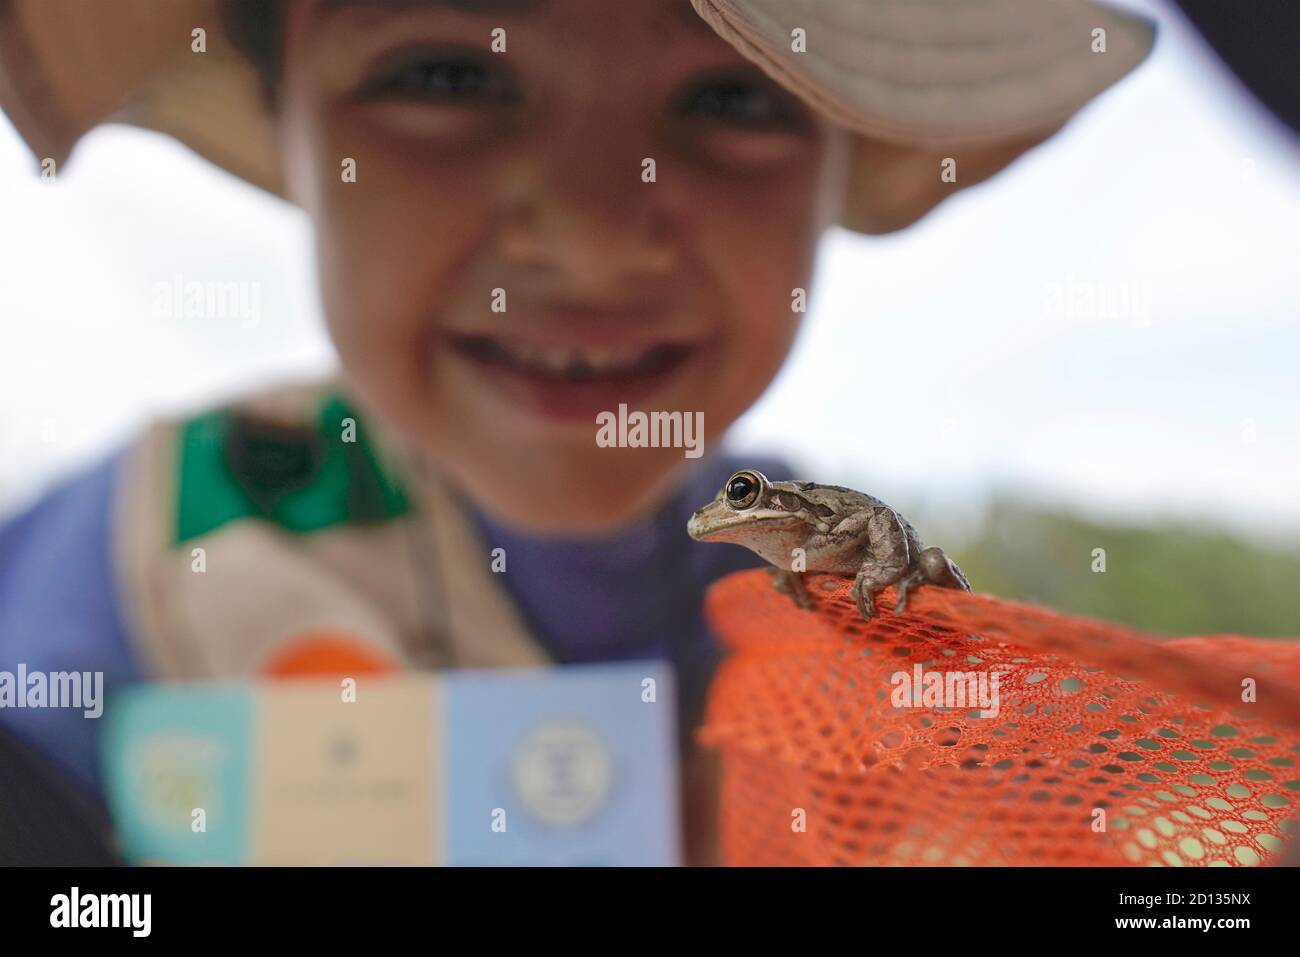 Girl looking closely at a frog Stock Photo